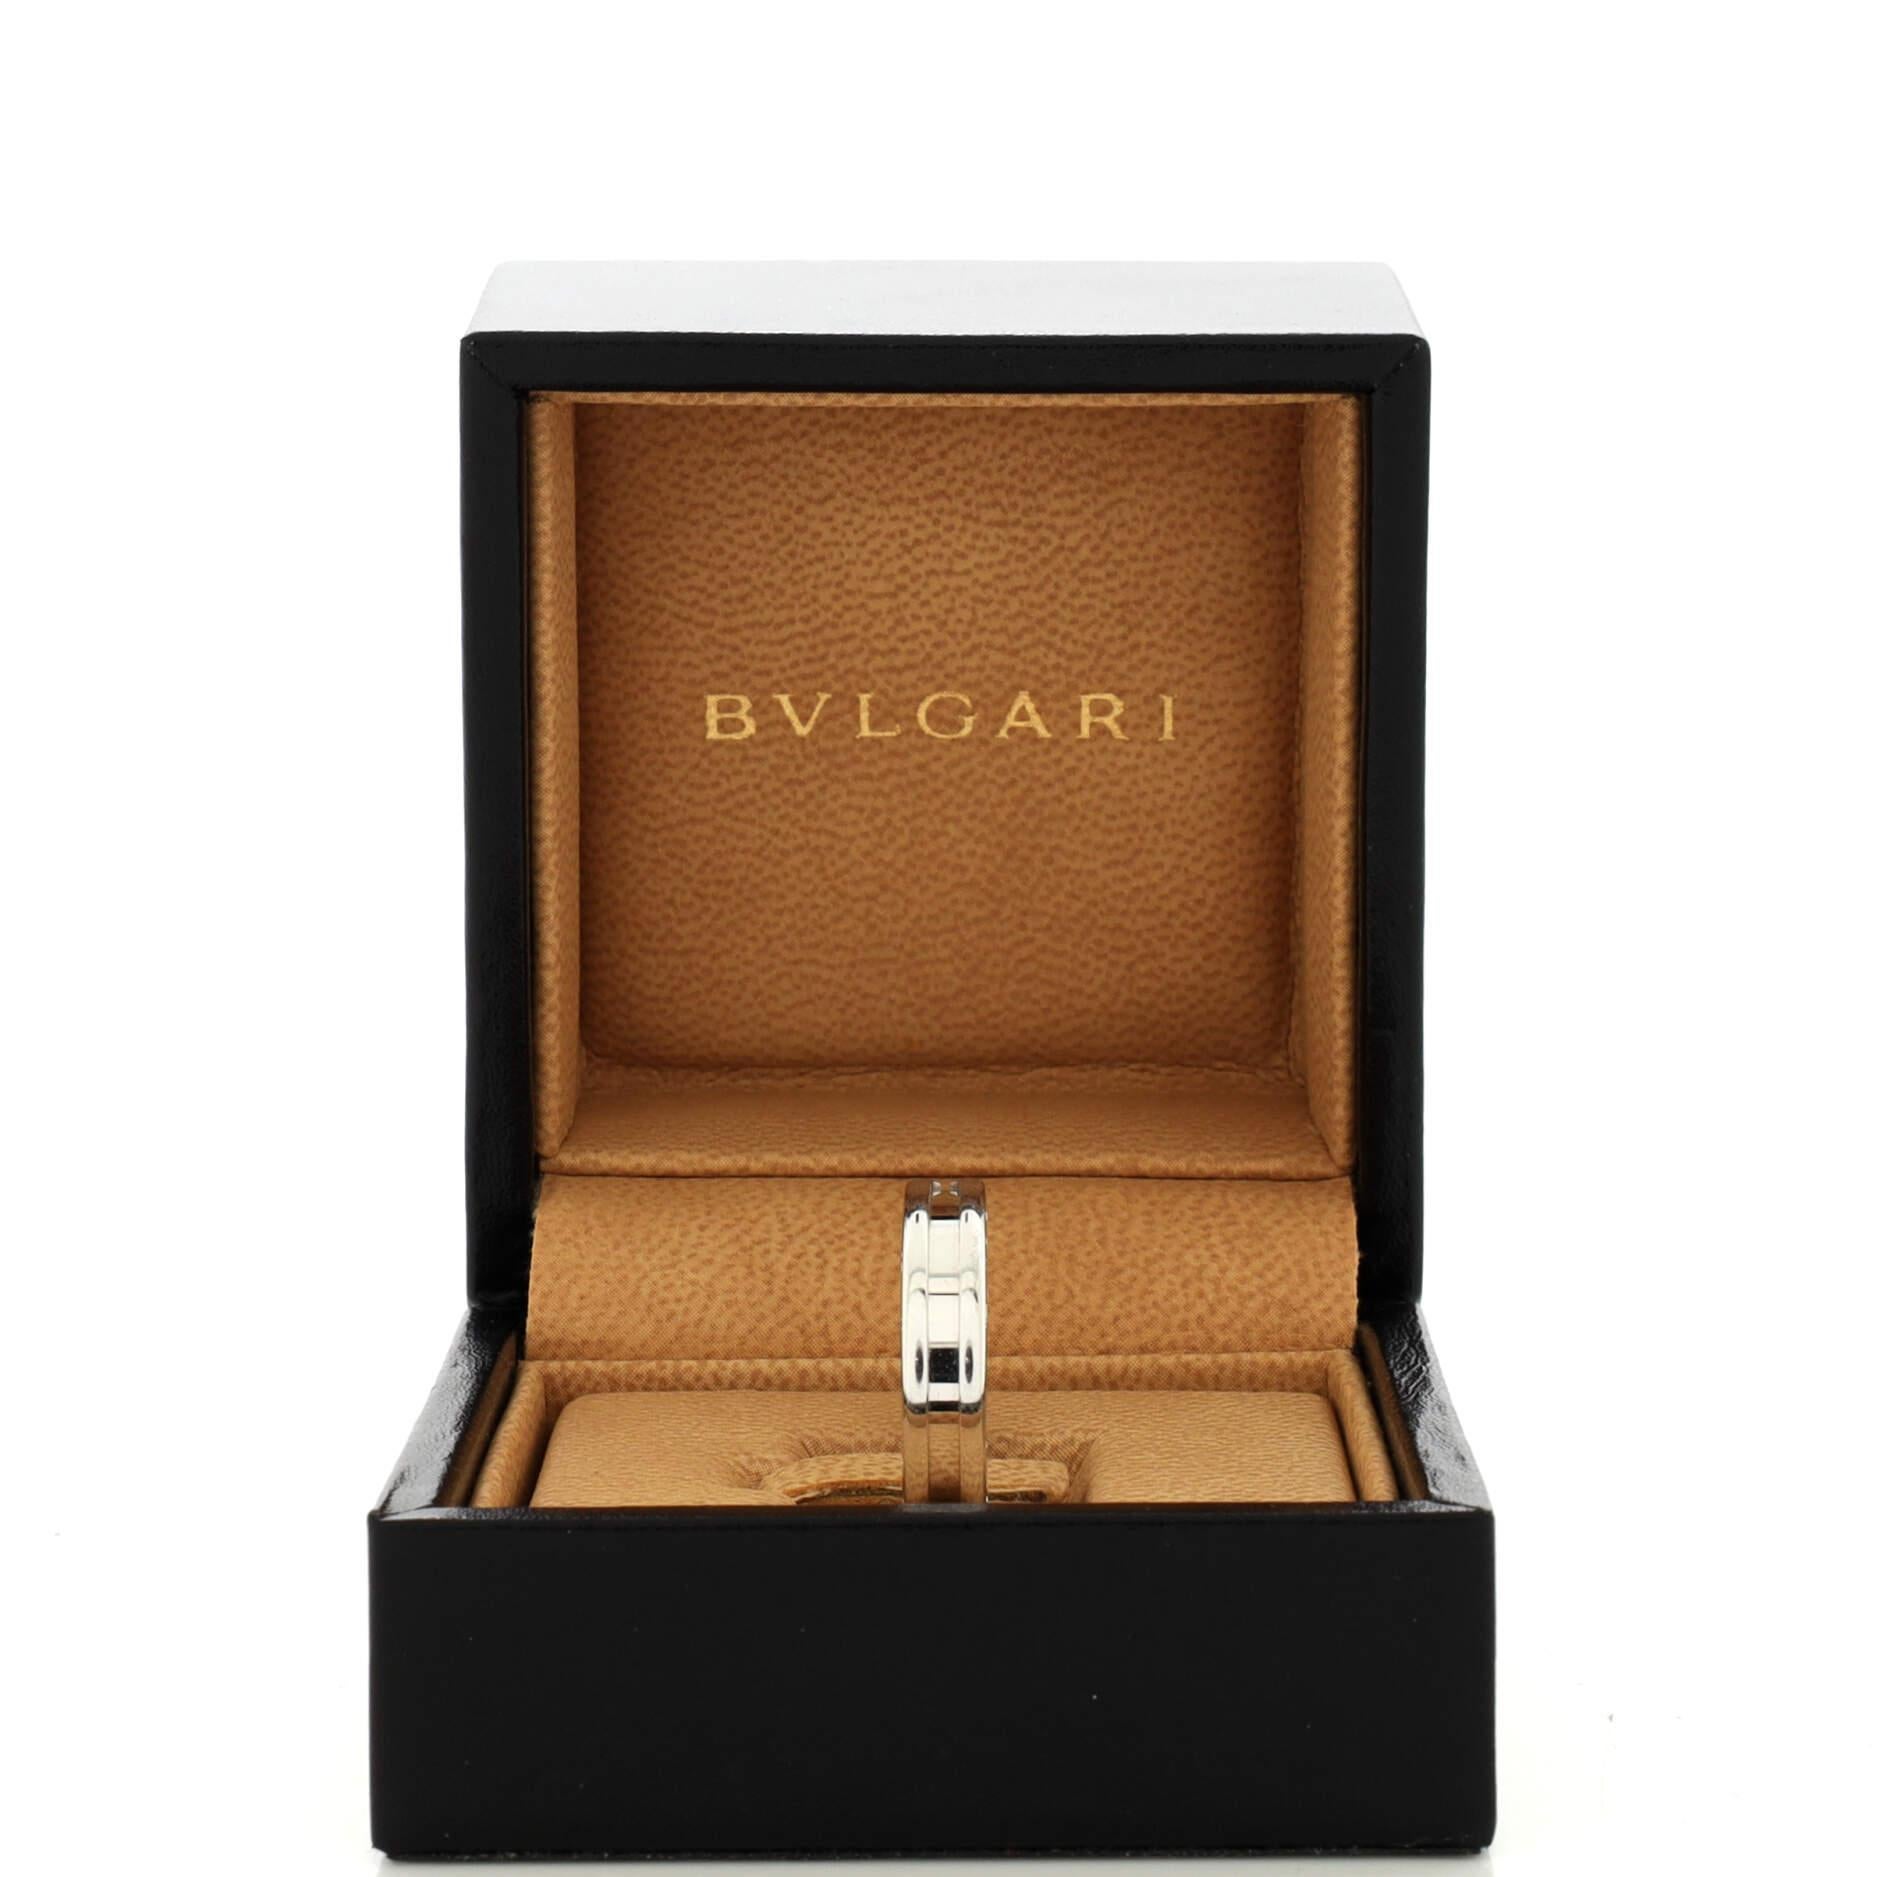 Condition: Great. Minor wear throughout.
Accessories: No Accessories
Measurements: Size: 5.75 - 51, Width: 5 mm
Designer: Bvlgari
Model: B.Zero1 One Band Ring 18K White Gold
Exterior Color: White Gold
Item Number: 214403/18